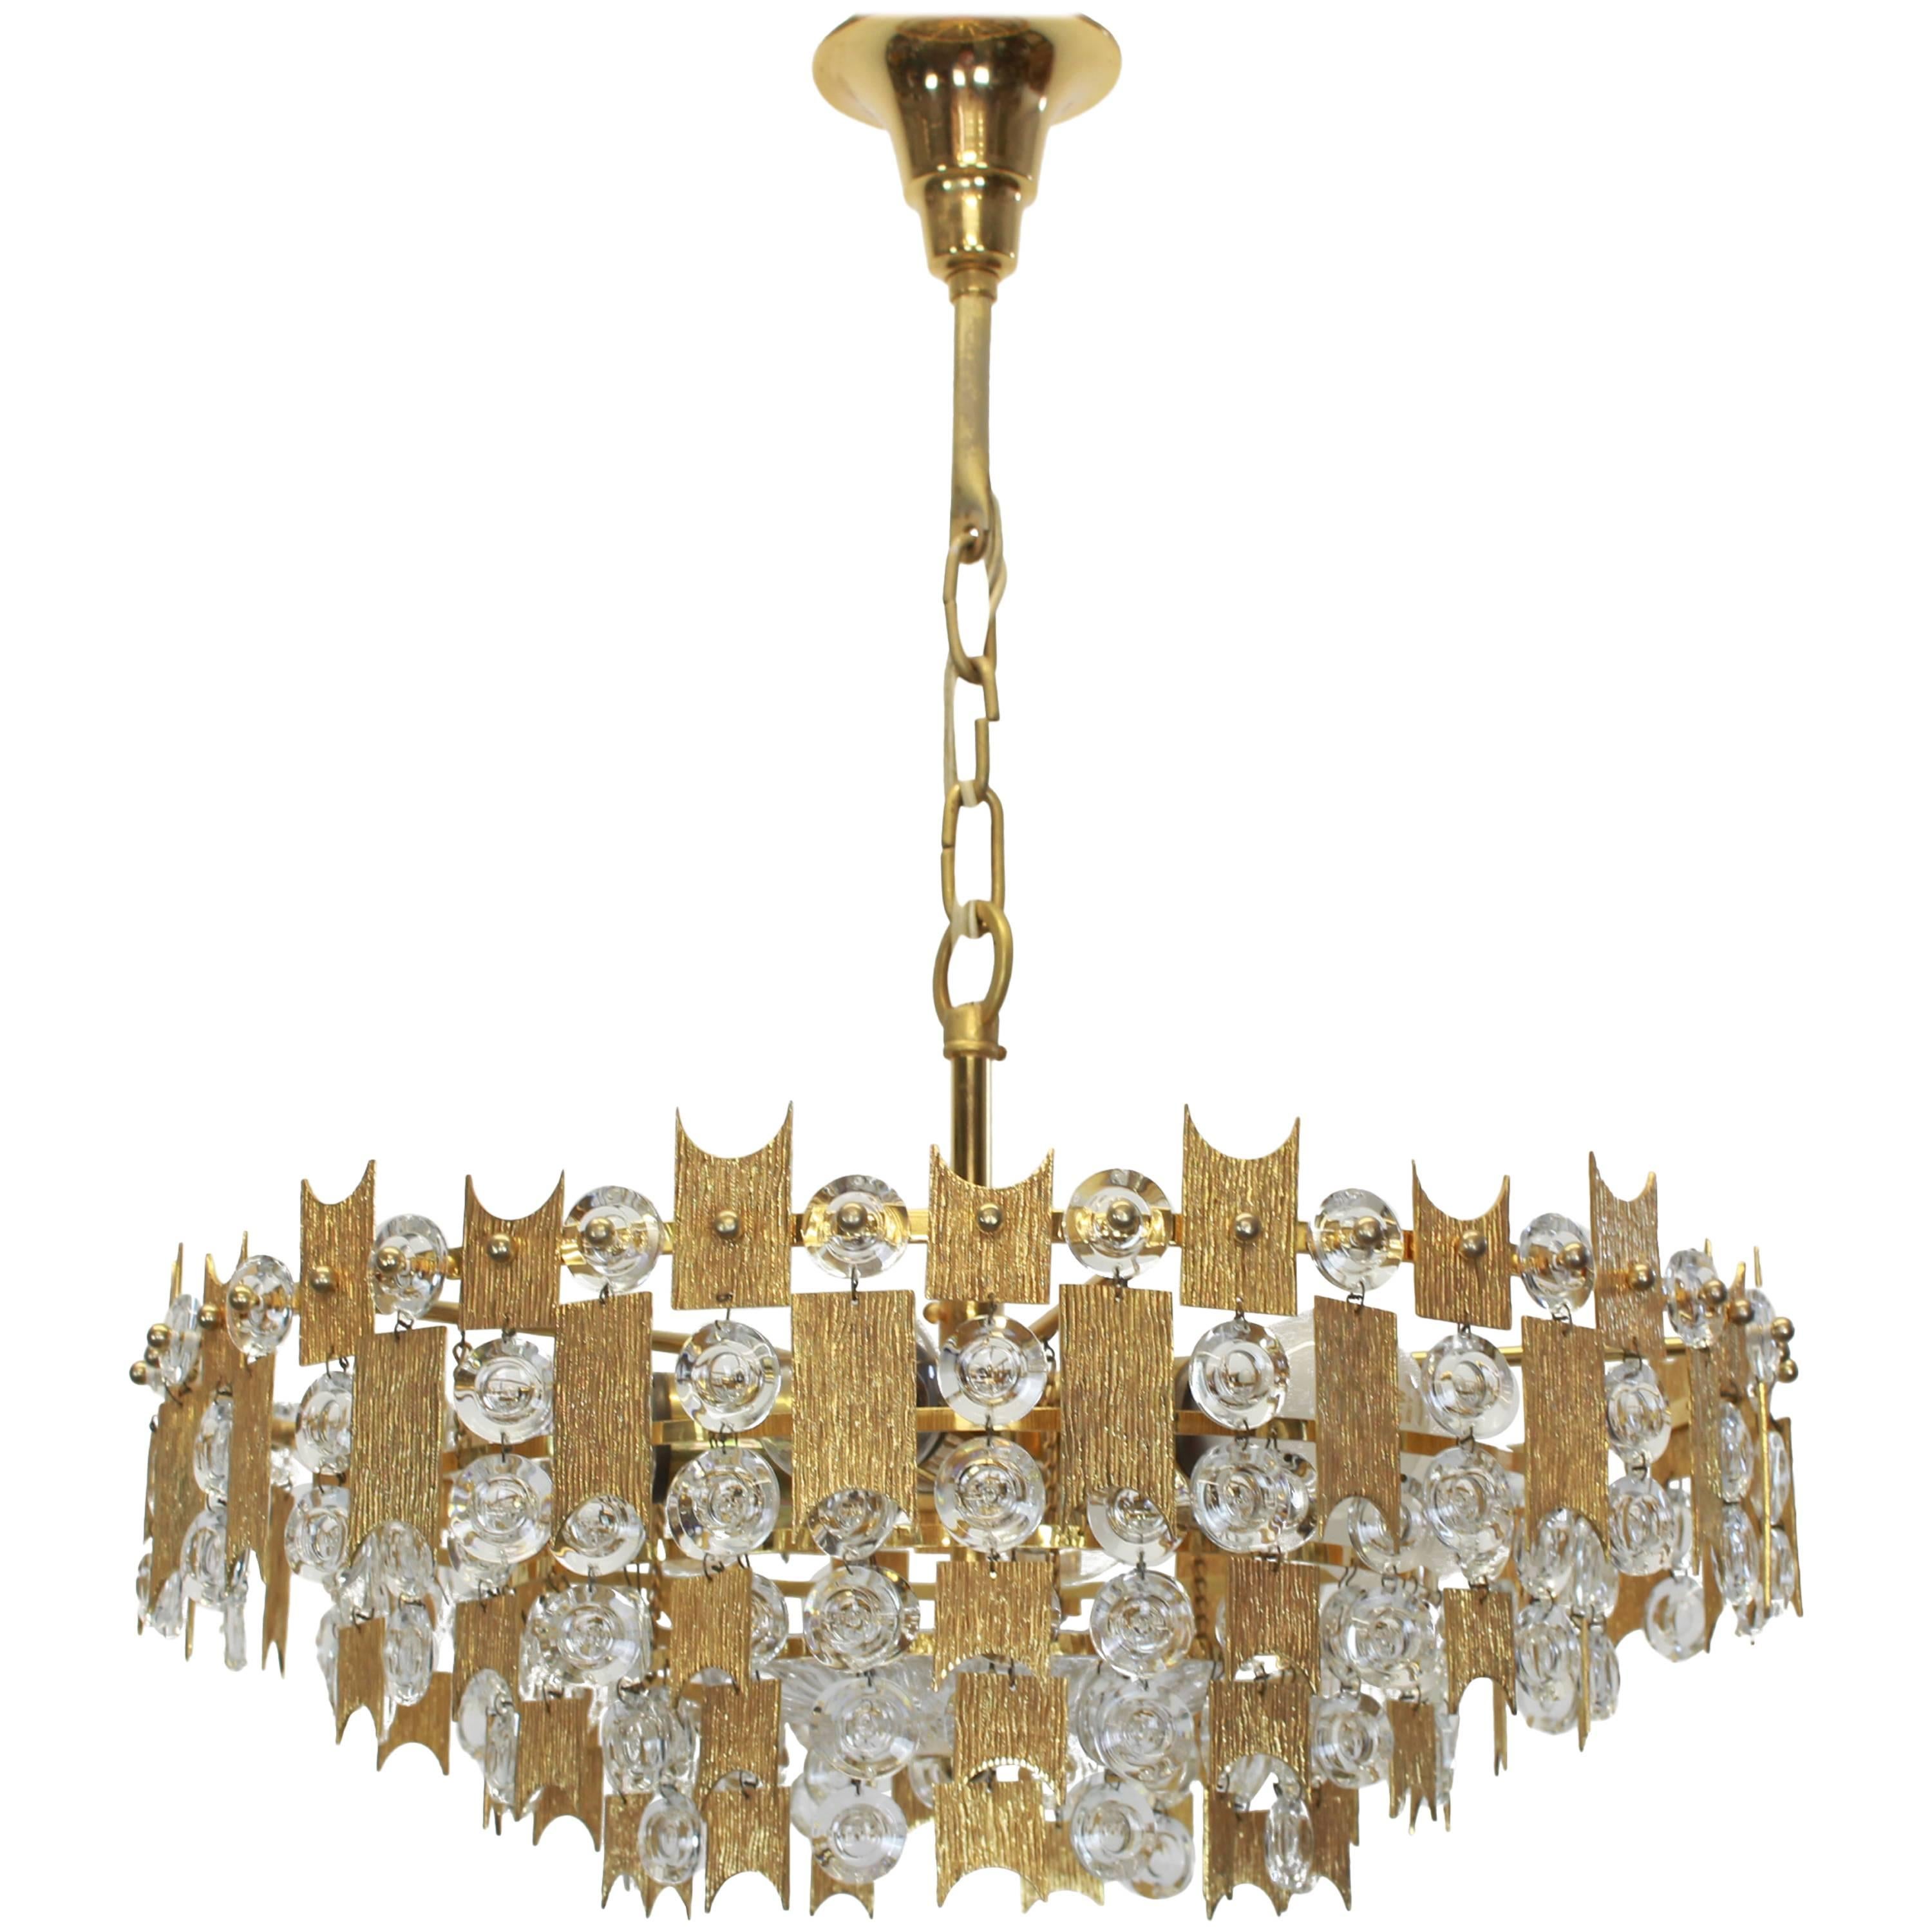 Mid-Century Modern 1 of 2 Impressive Large Gilt Brass and Crystal Chandelier- Palwa -Germany, 1960s For Sale